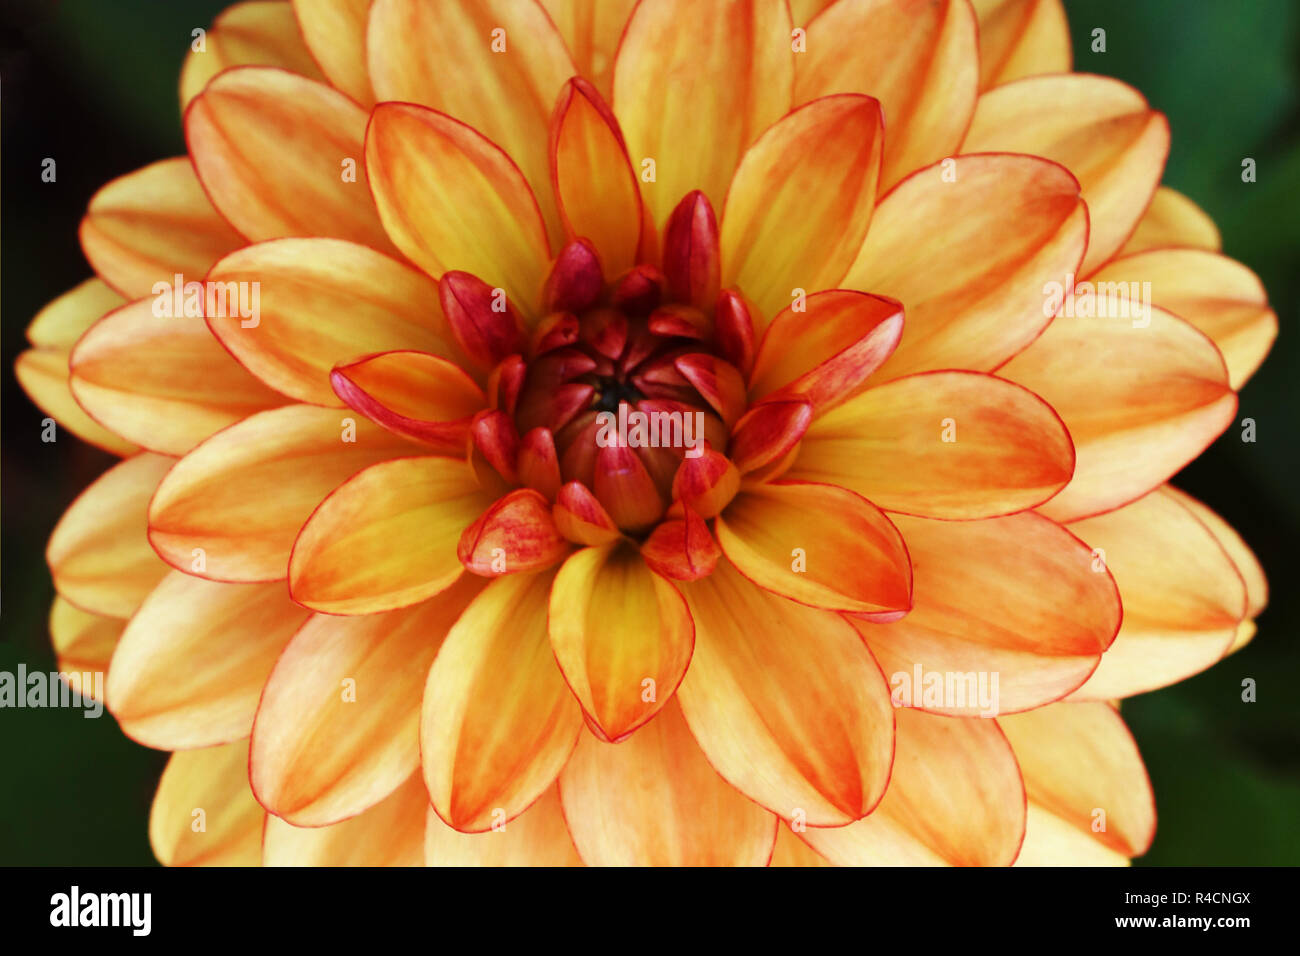 A single dahlia flower with bright red and orange petals Stock Photo